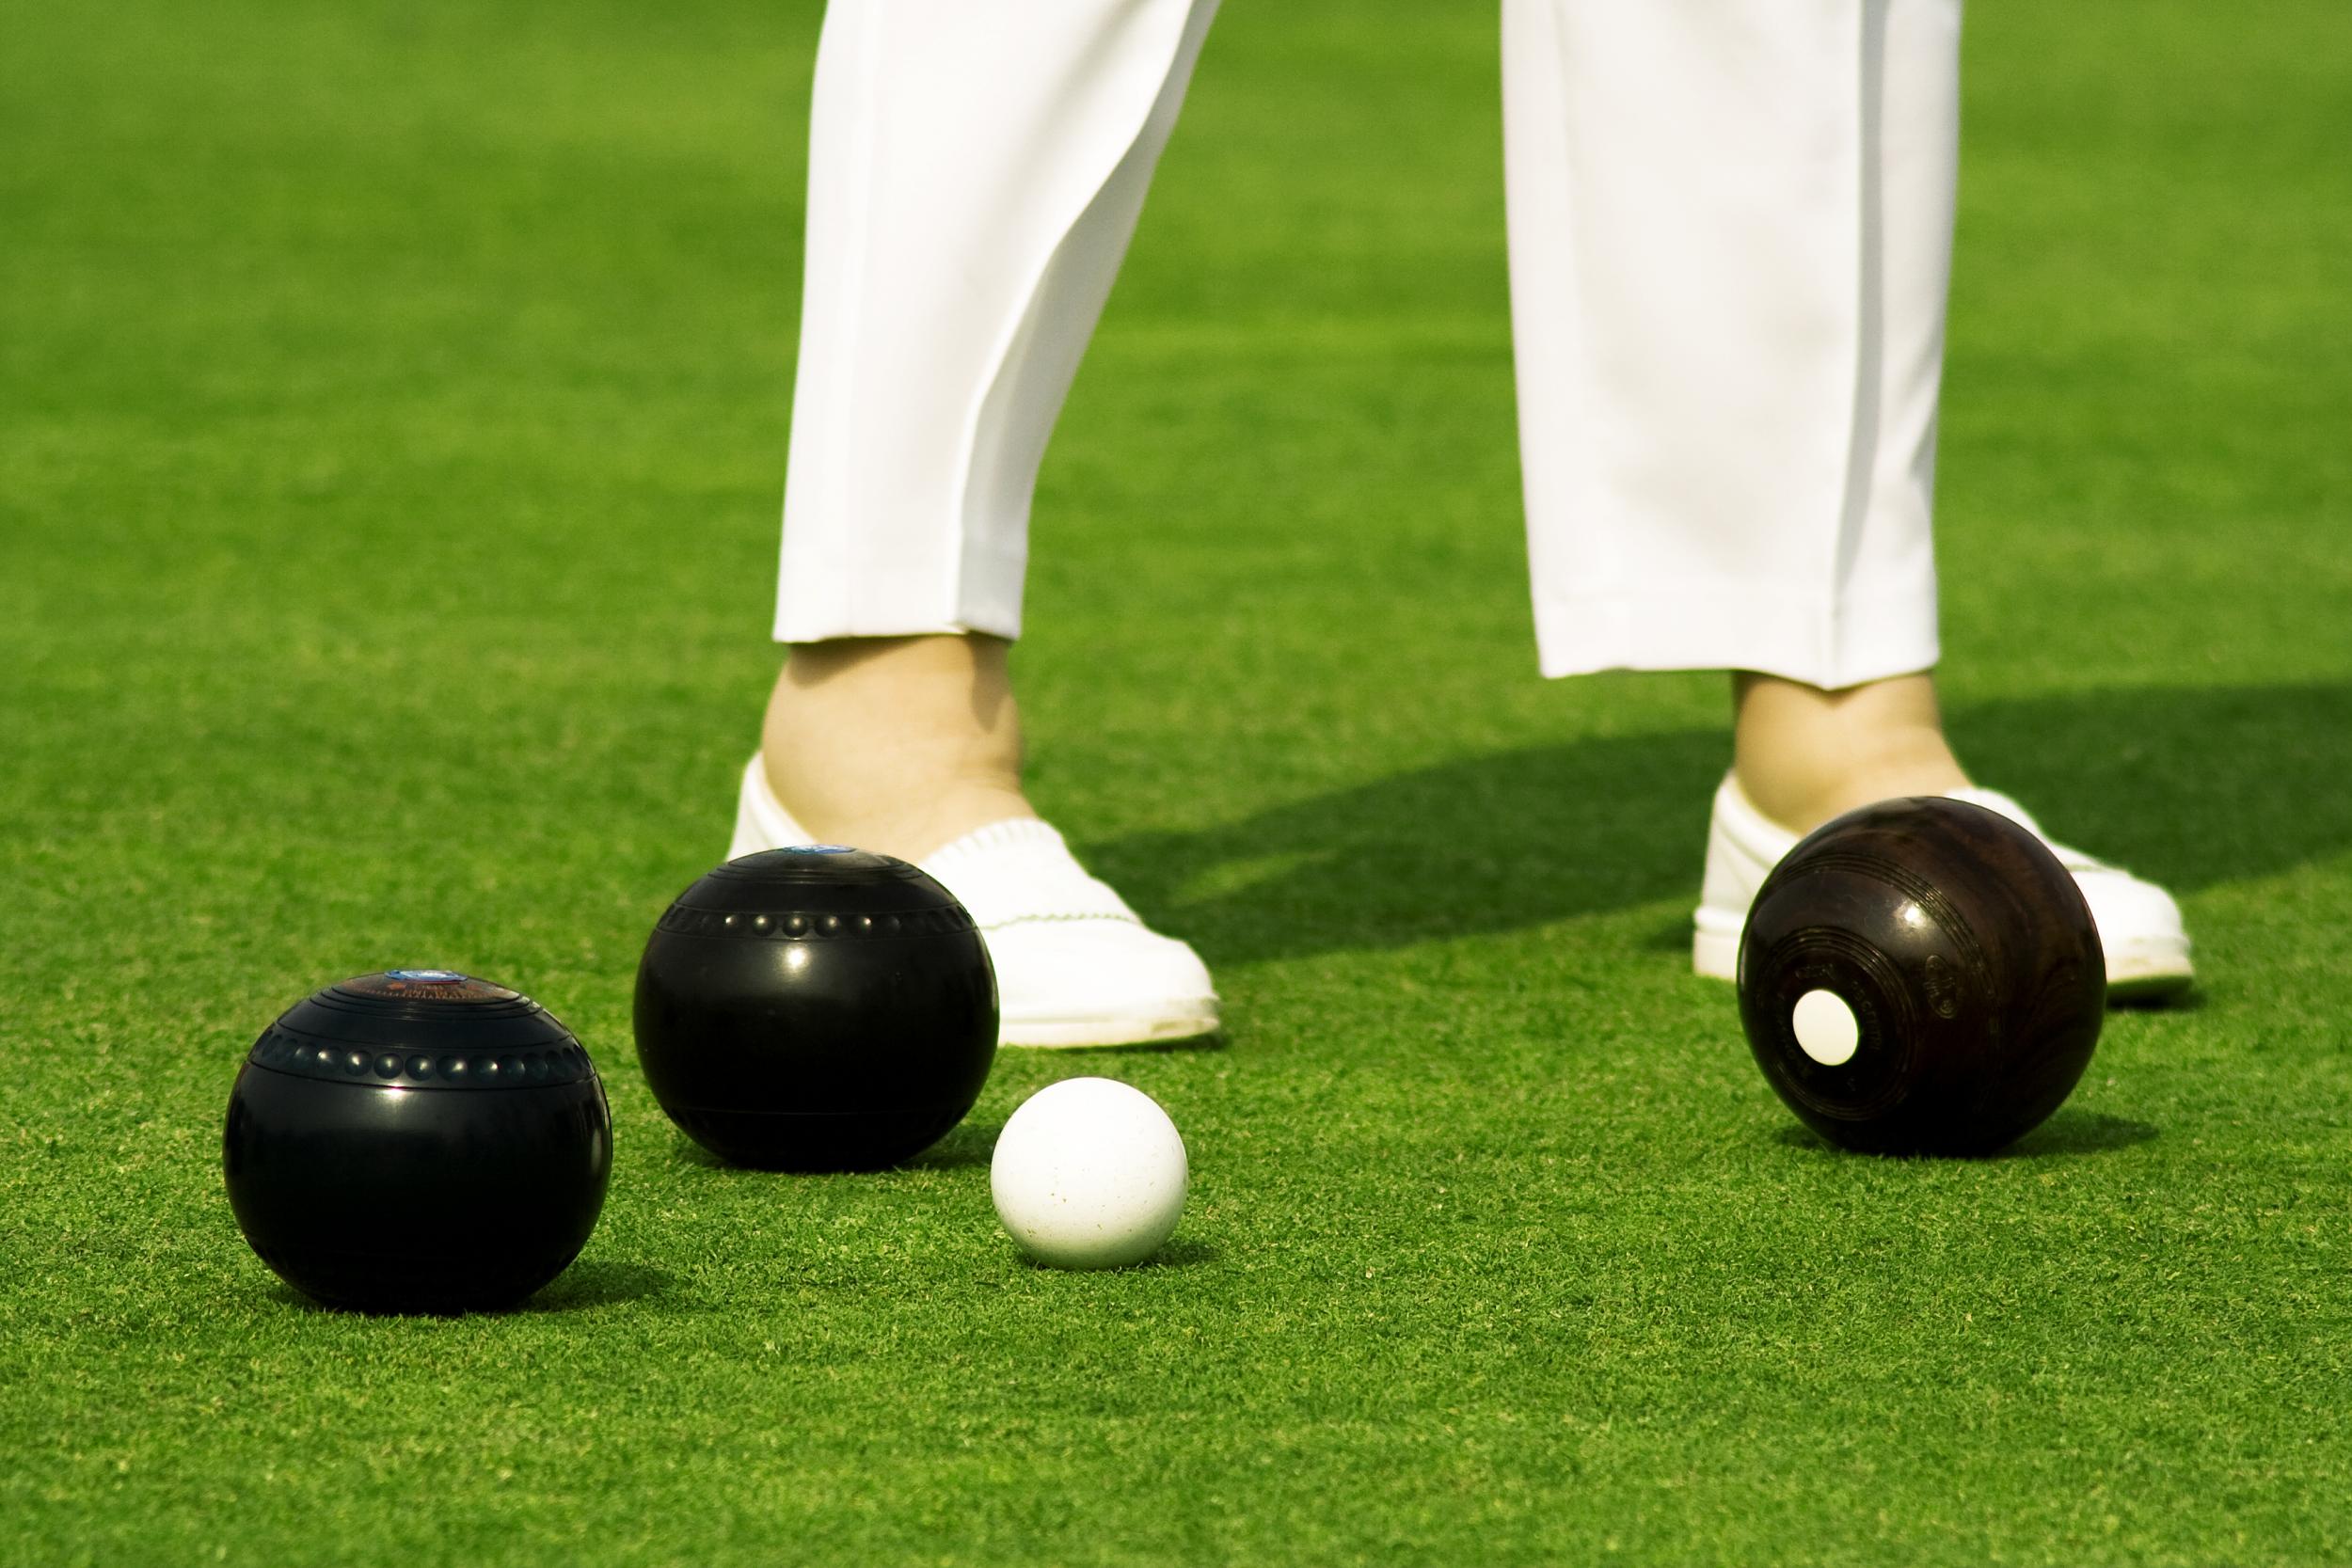 COVID-19: Additional Guidance for Lawn Bowls - Bowls England